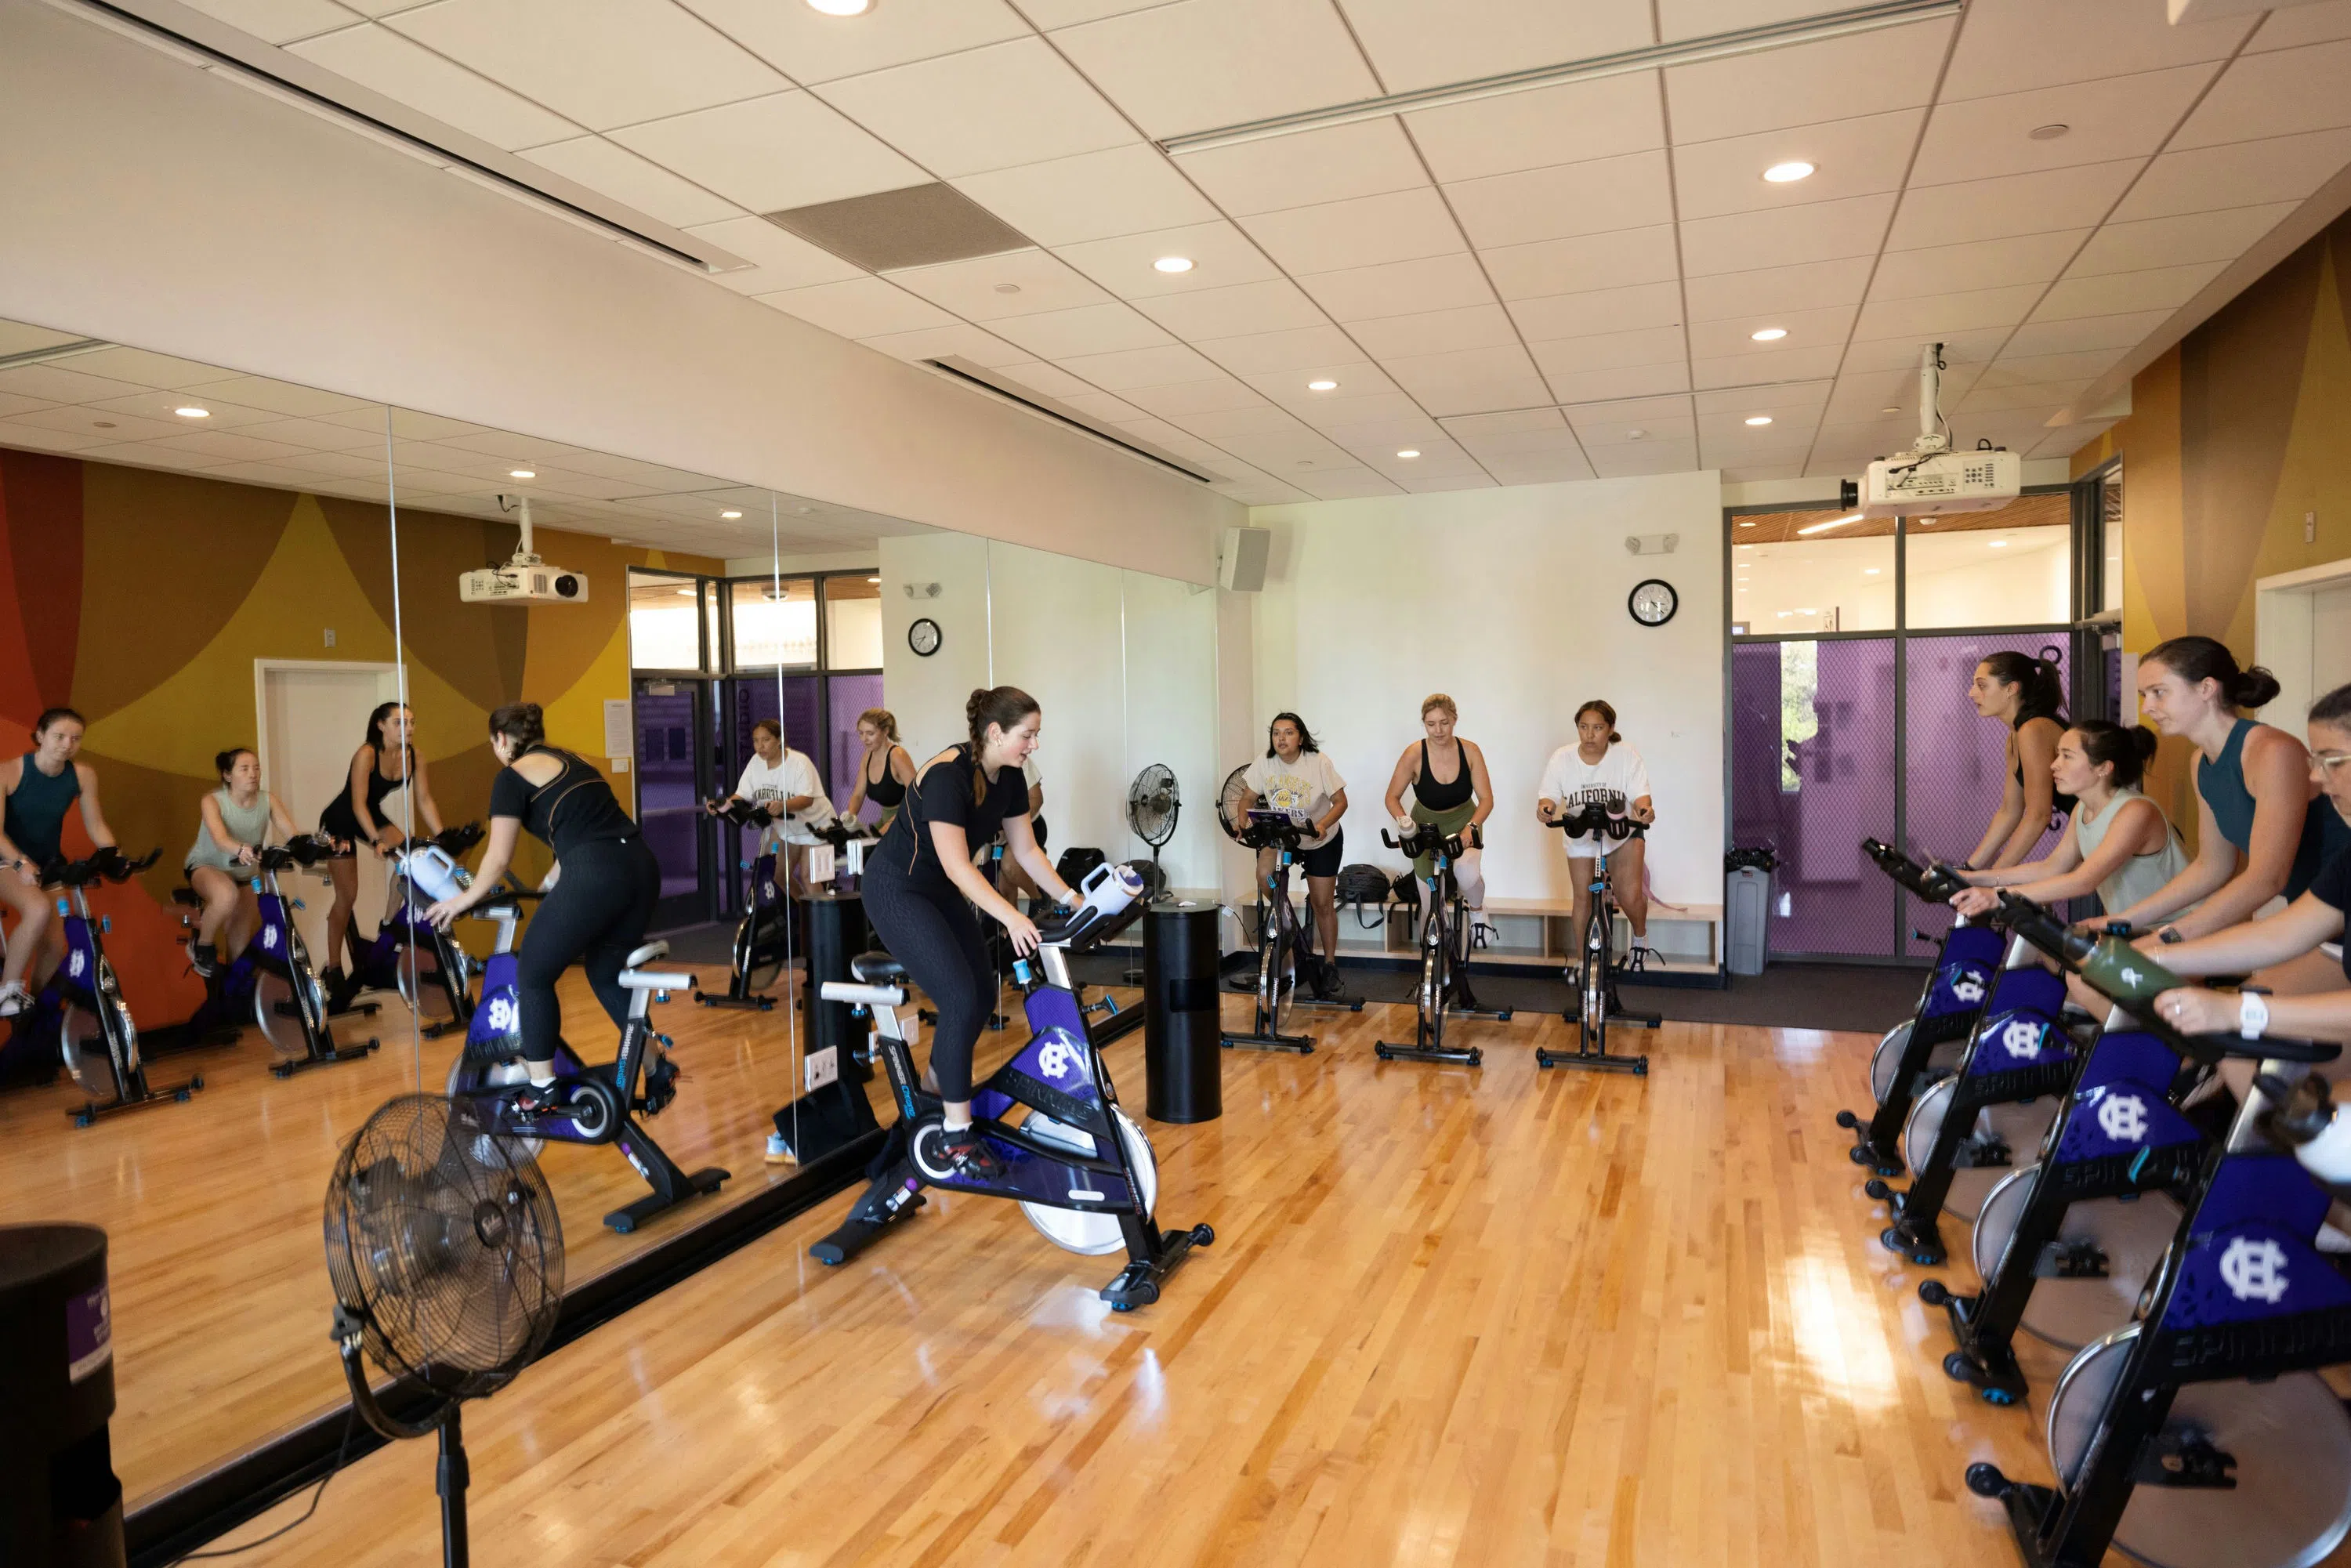 Students taking a spinning class in The Jo